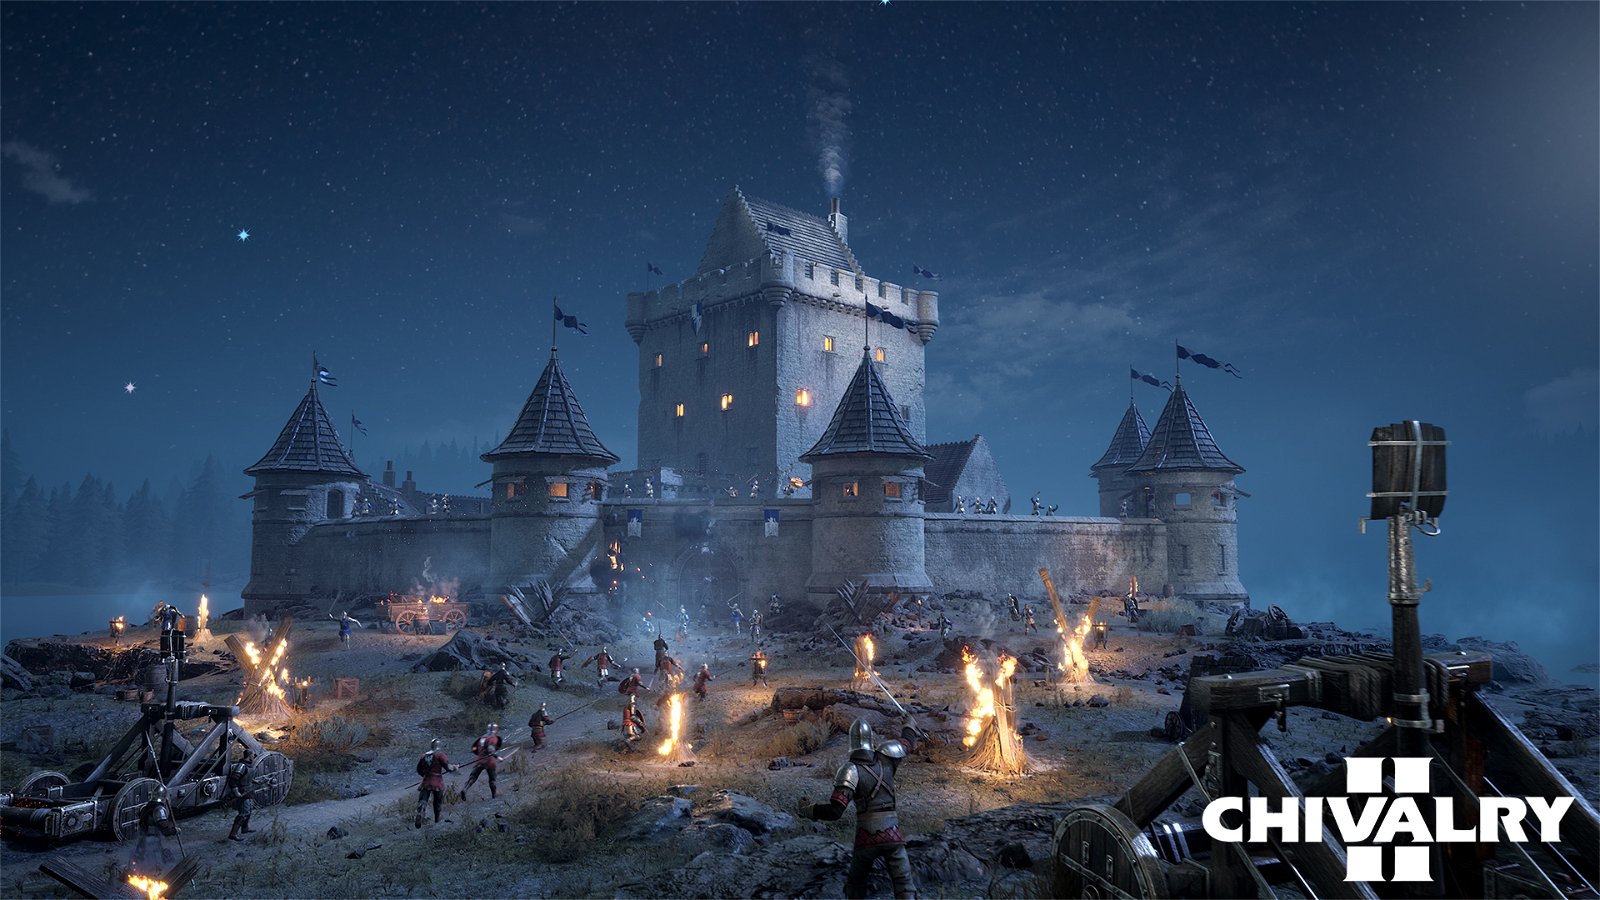 Chivalry II, Chivalry 2, Chivalry Sequel, Torn Banner Studios, Deep Silver, Tripwire Presents, PlayStation 4, PS4, XONE, Xbox One, trailer, release date, Switch, North America, US, Europe, pre-order, price, gameplay, features